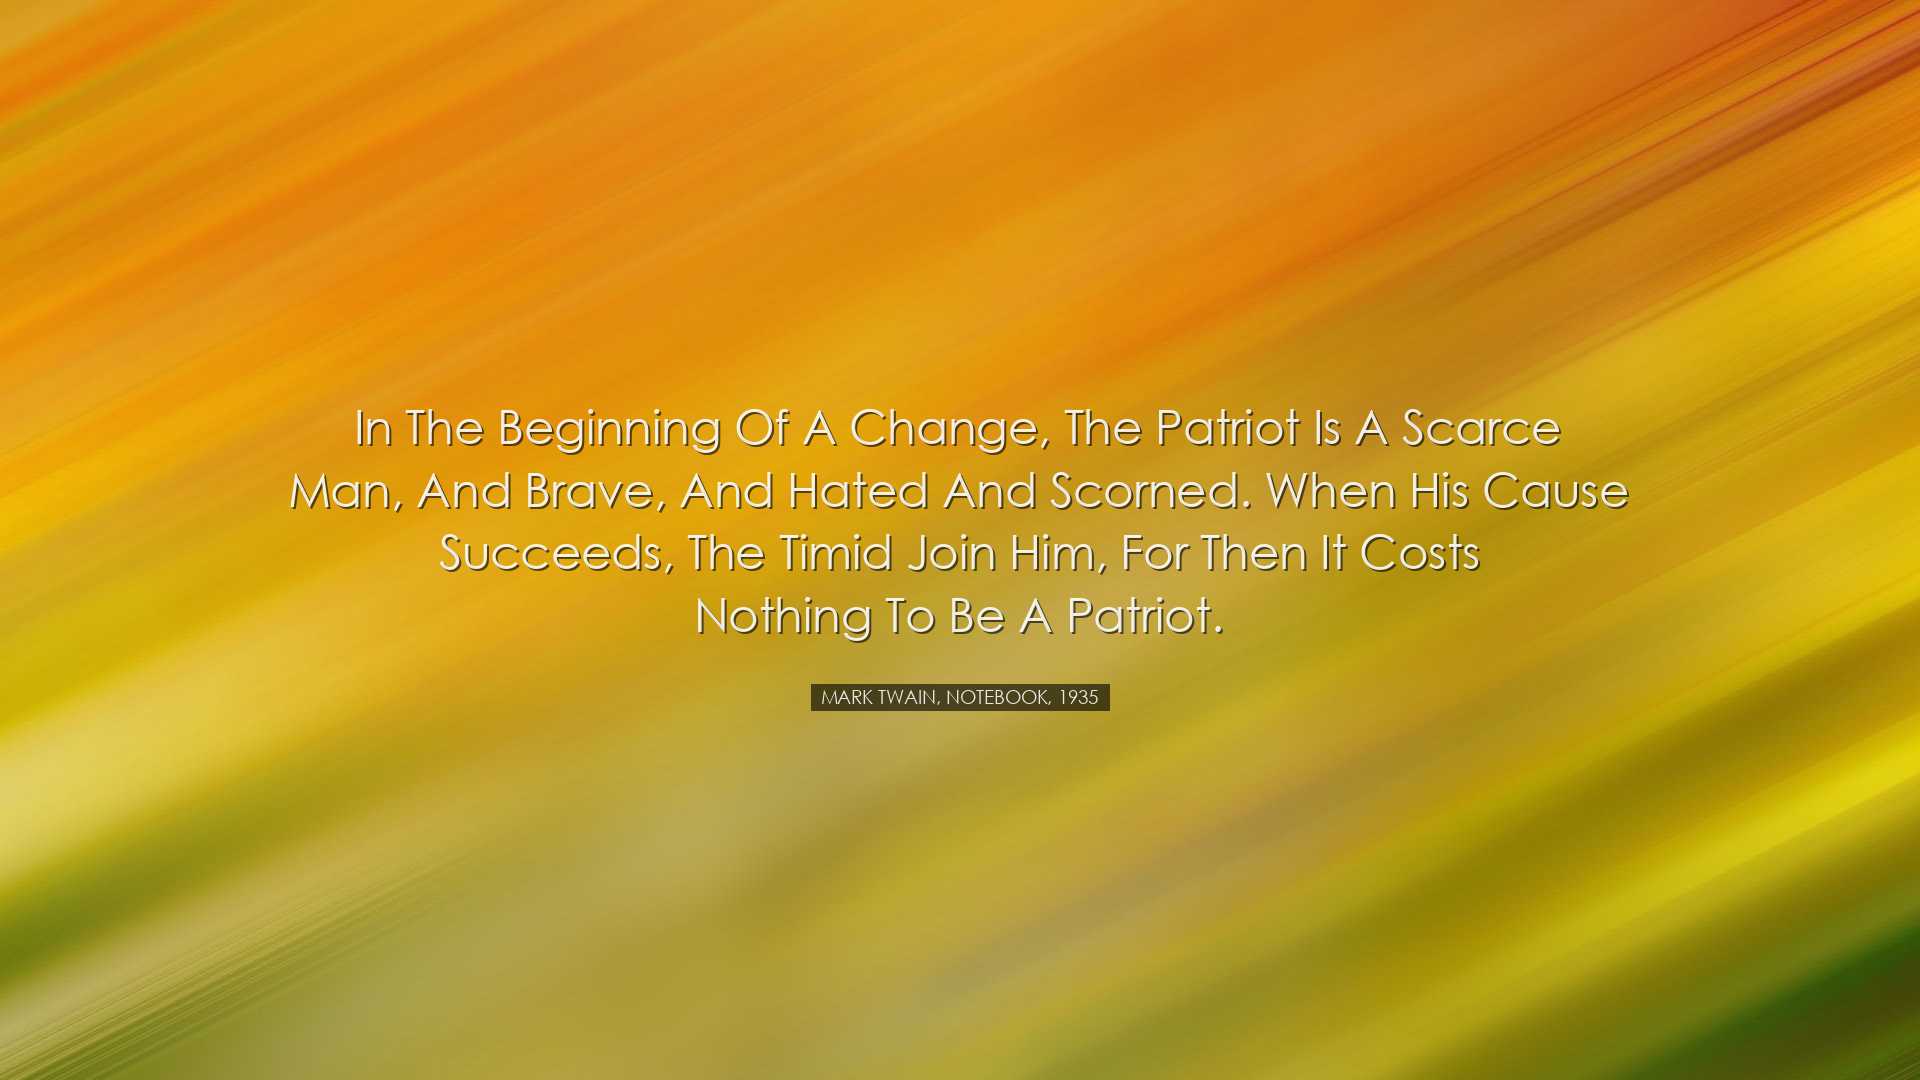 In the beginning of a change, the patriot is a scarce man, and bra